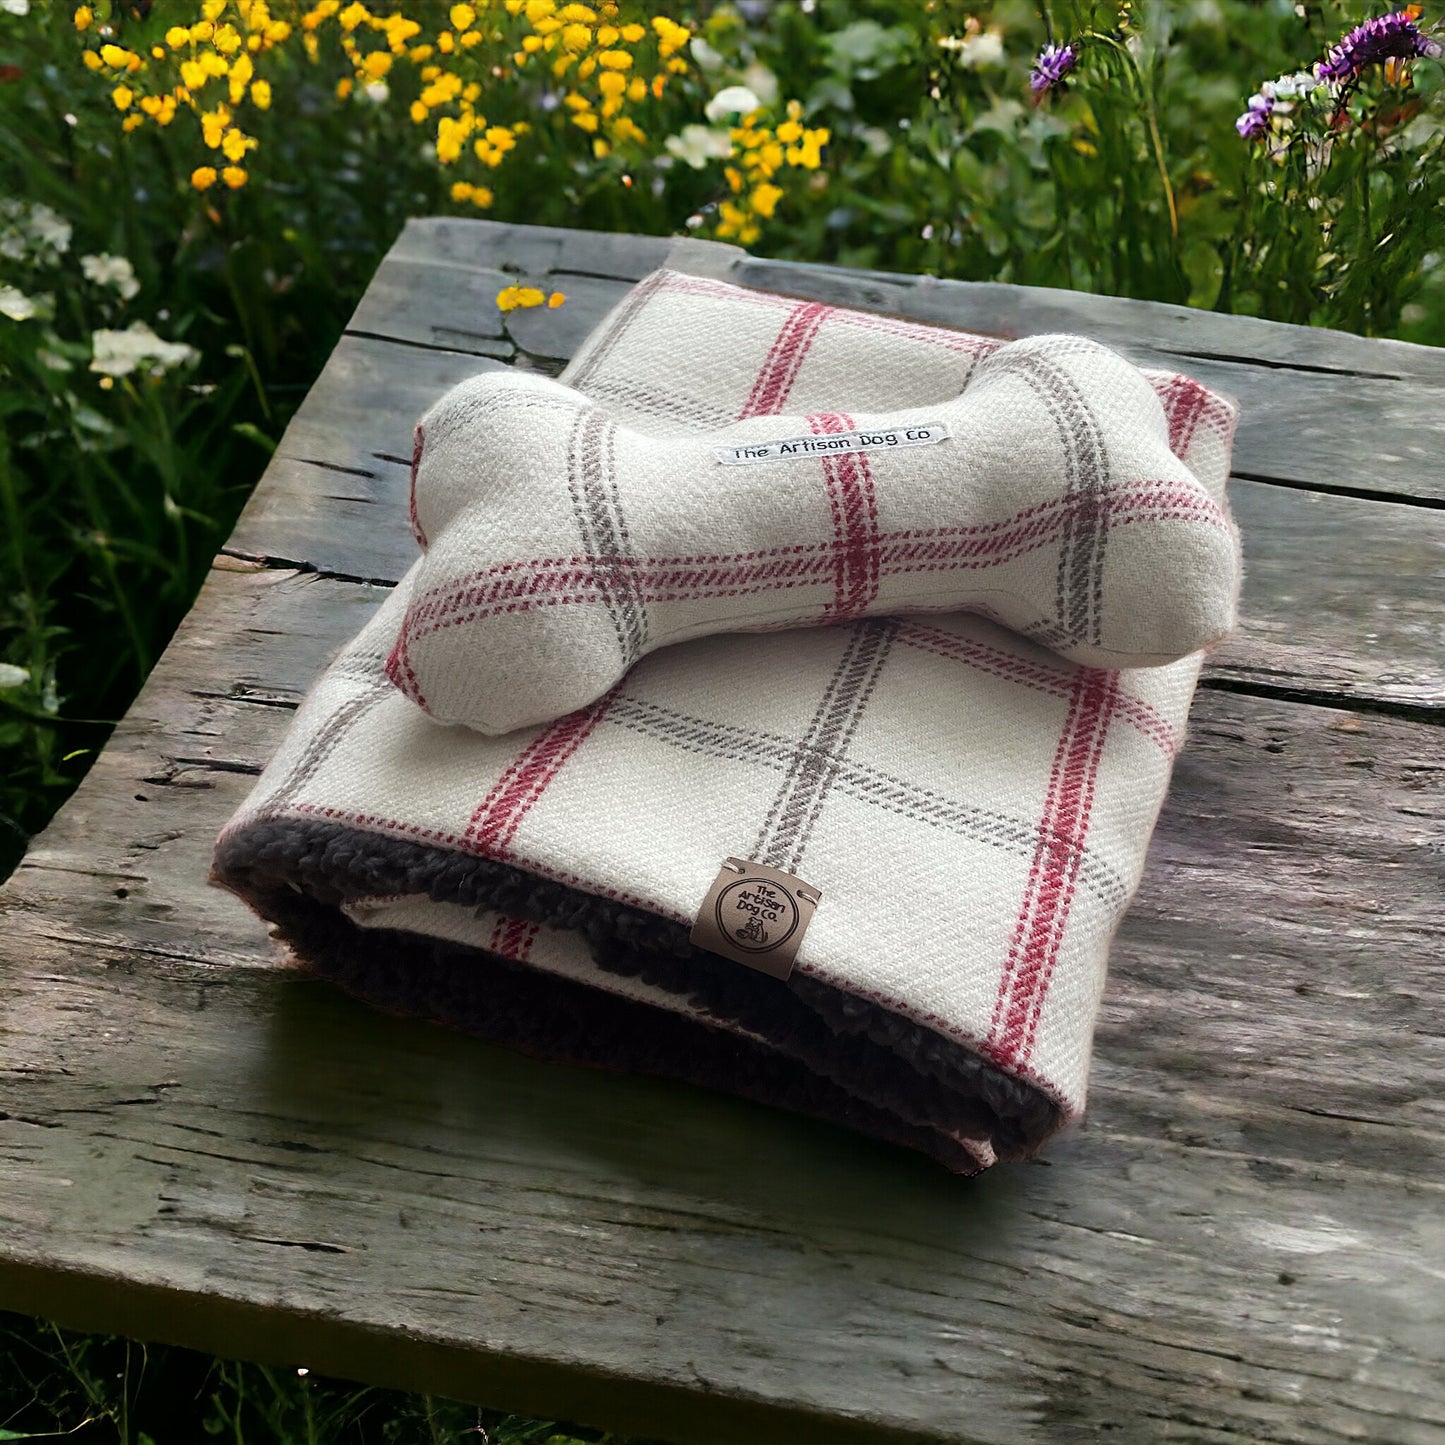 Luxury Handcrafted Knighthayes Cream/red/grey check Dog/pet Blanket